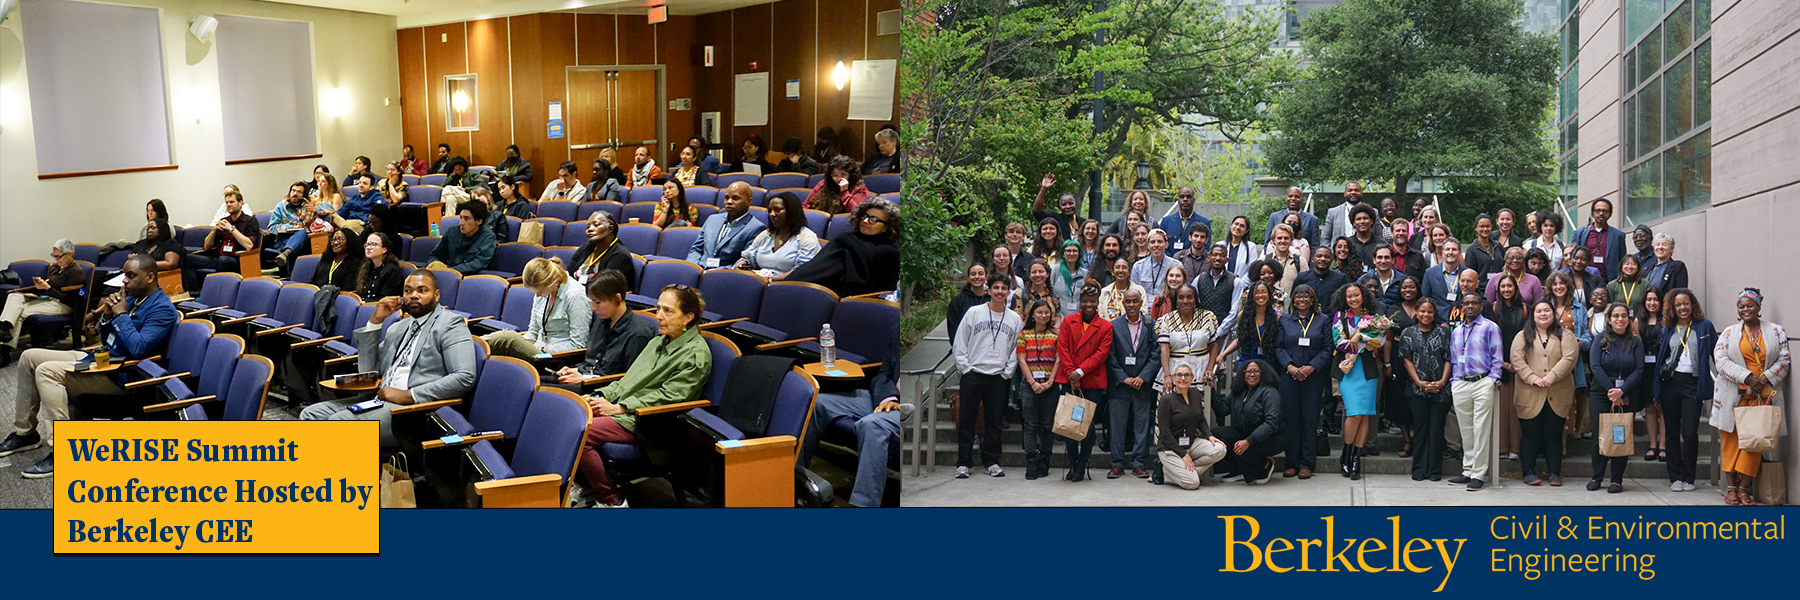 Pictured: On the left is a picture of WeRISE Summit Conference attendees inside Banatao Auditorium. On the right is a group picture of WeRISE Summit Conference Attendees. (Photo Credit: Pooja Nerkar/Berkeley CEE)